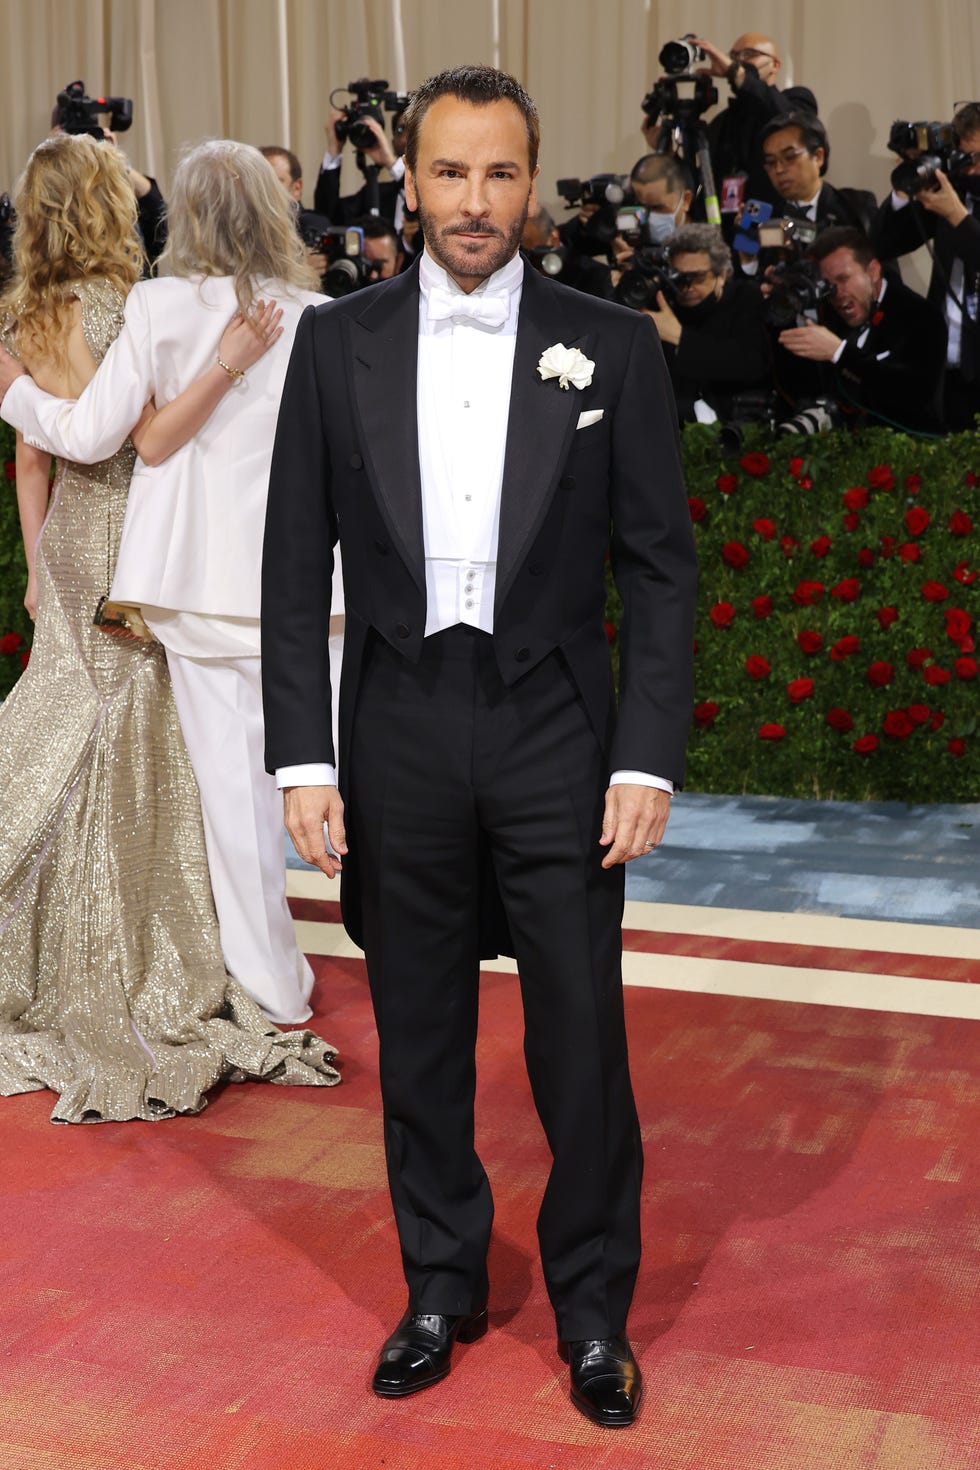 Tom Ford wore Tom Ford Suit @ the 2022 met gala | Digital Magazine